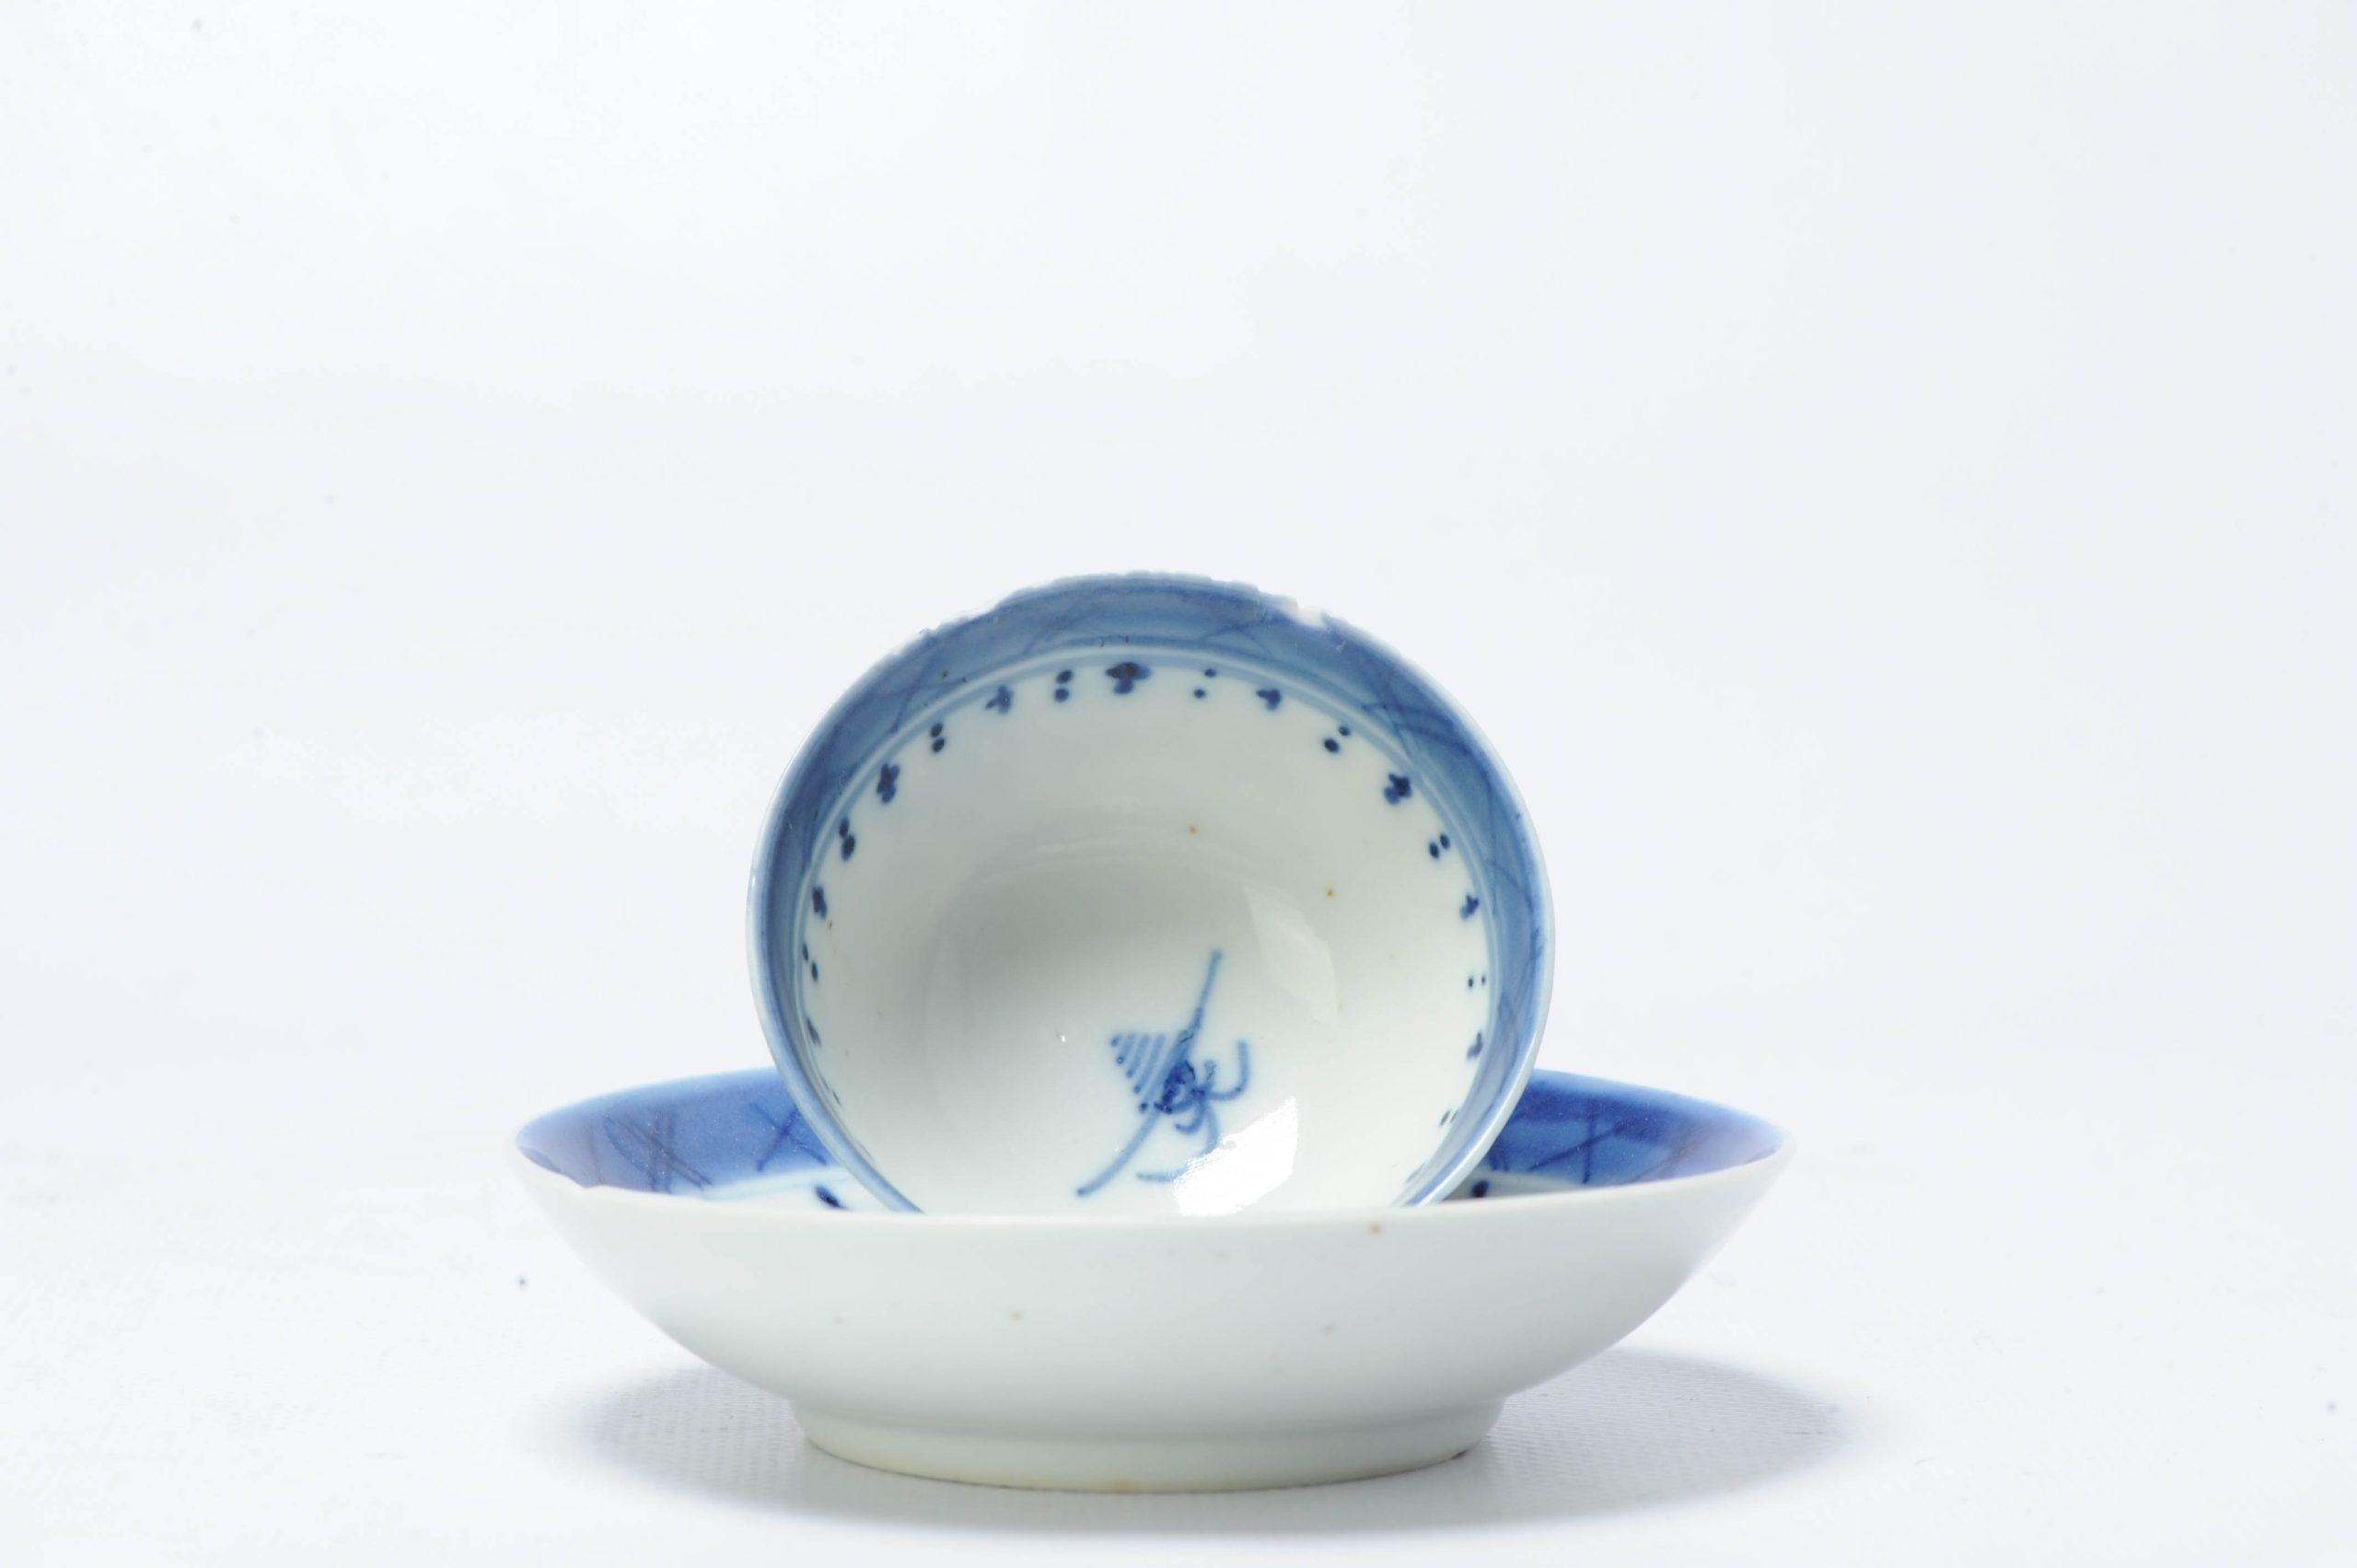 Antique Chinese Porcelain Blue and White Tea Bowl Cup Landscape, 18th Century  In Good Condition For Sale In Amsterdam, Noord Holland